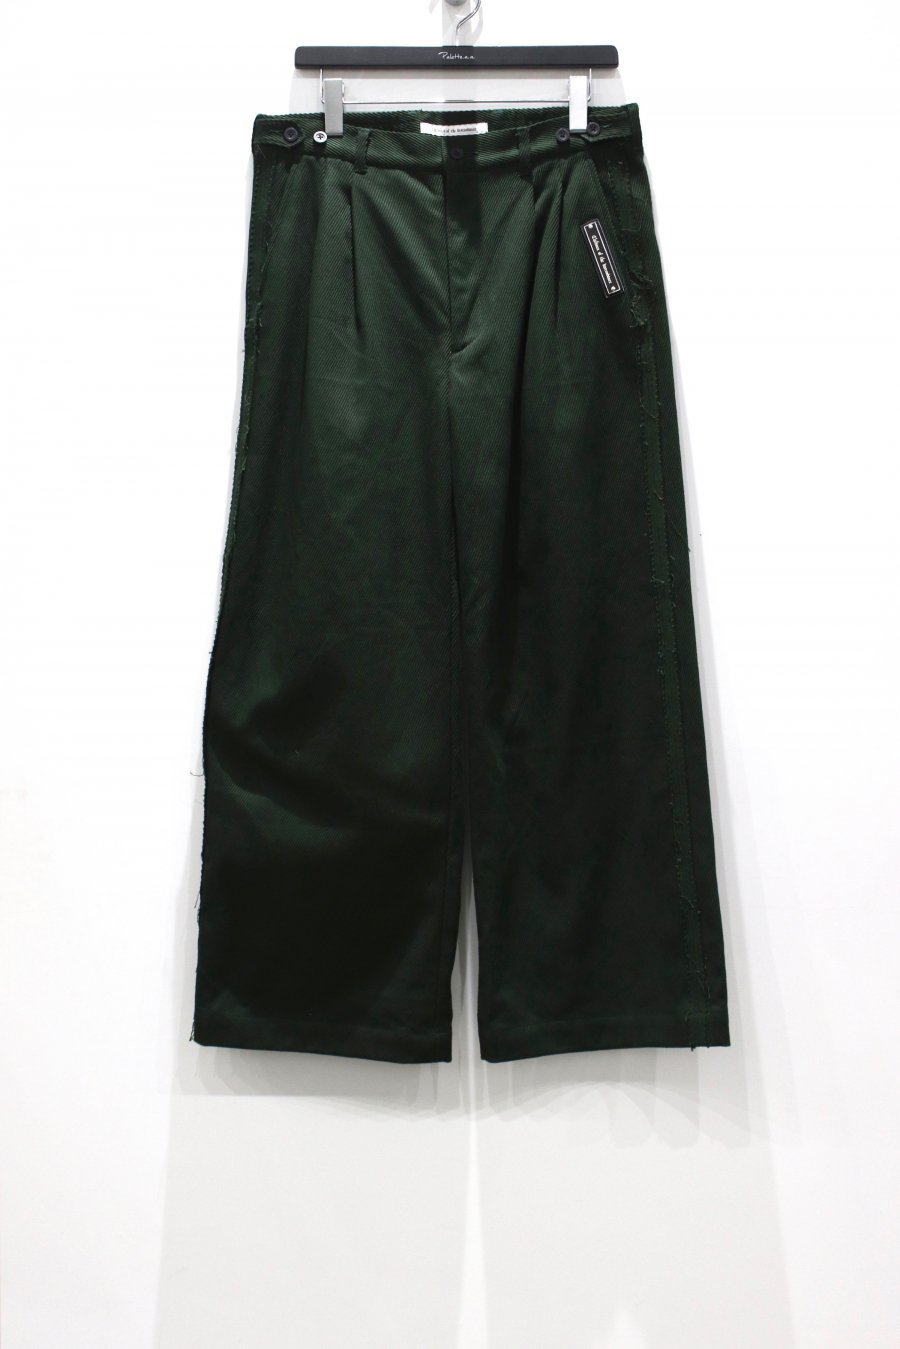 Children of the discordance   SELVAGE TROUSERS<img class='new_mark_img2' src='https://img.shop-pro.jp/img/new/icons15.gif' style='border:none;display:inline;margin:0px;padding:0px;width:auto;' />